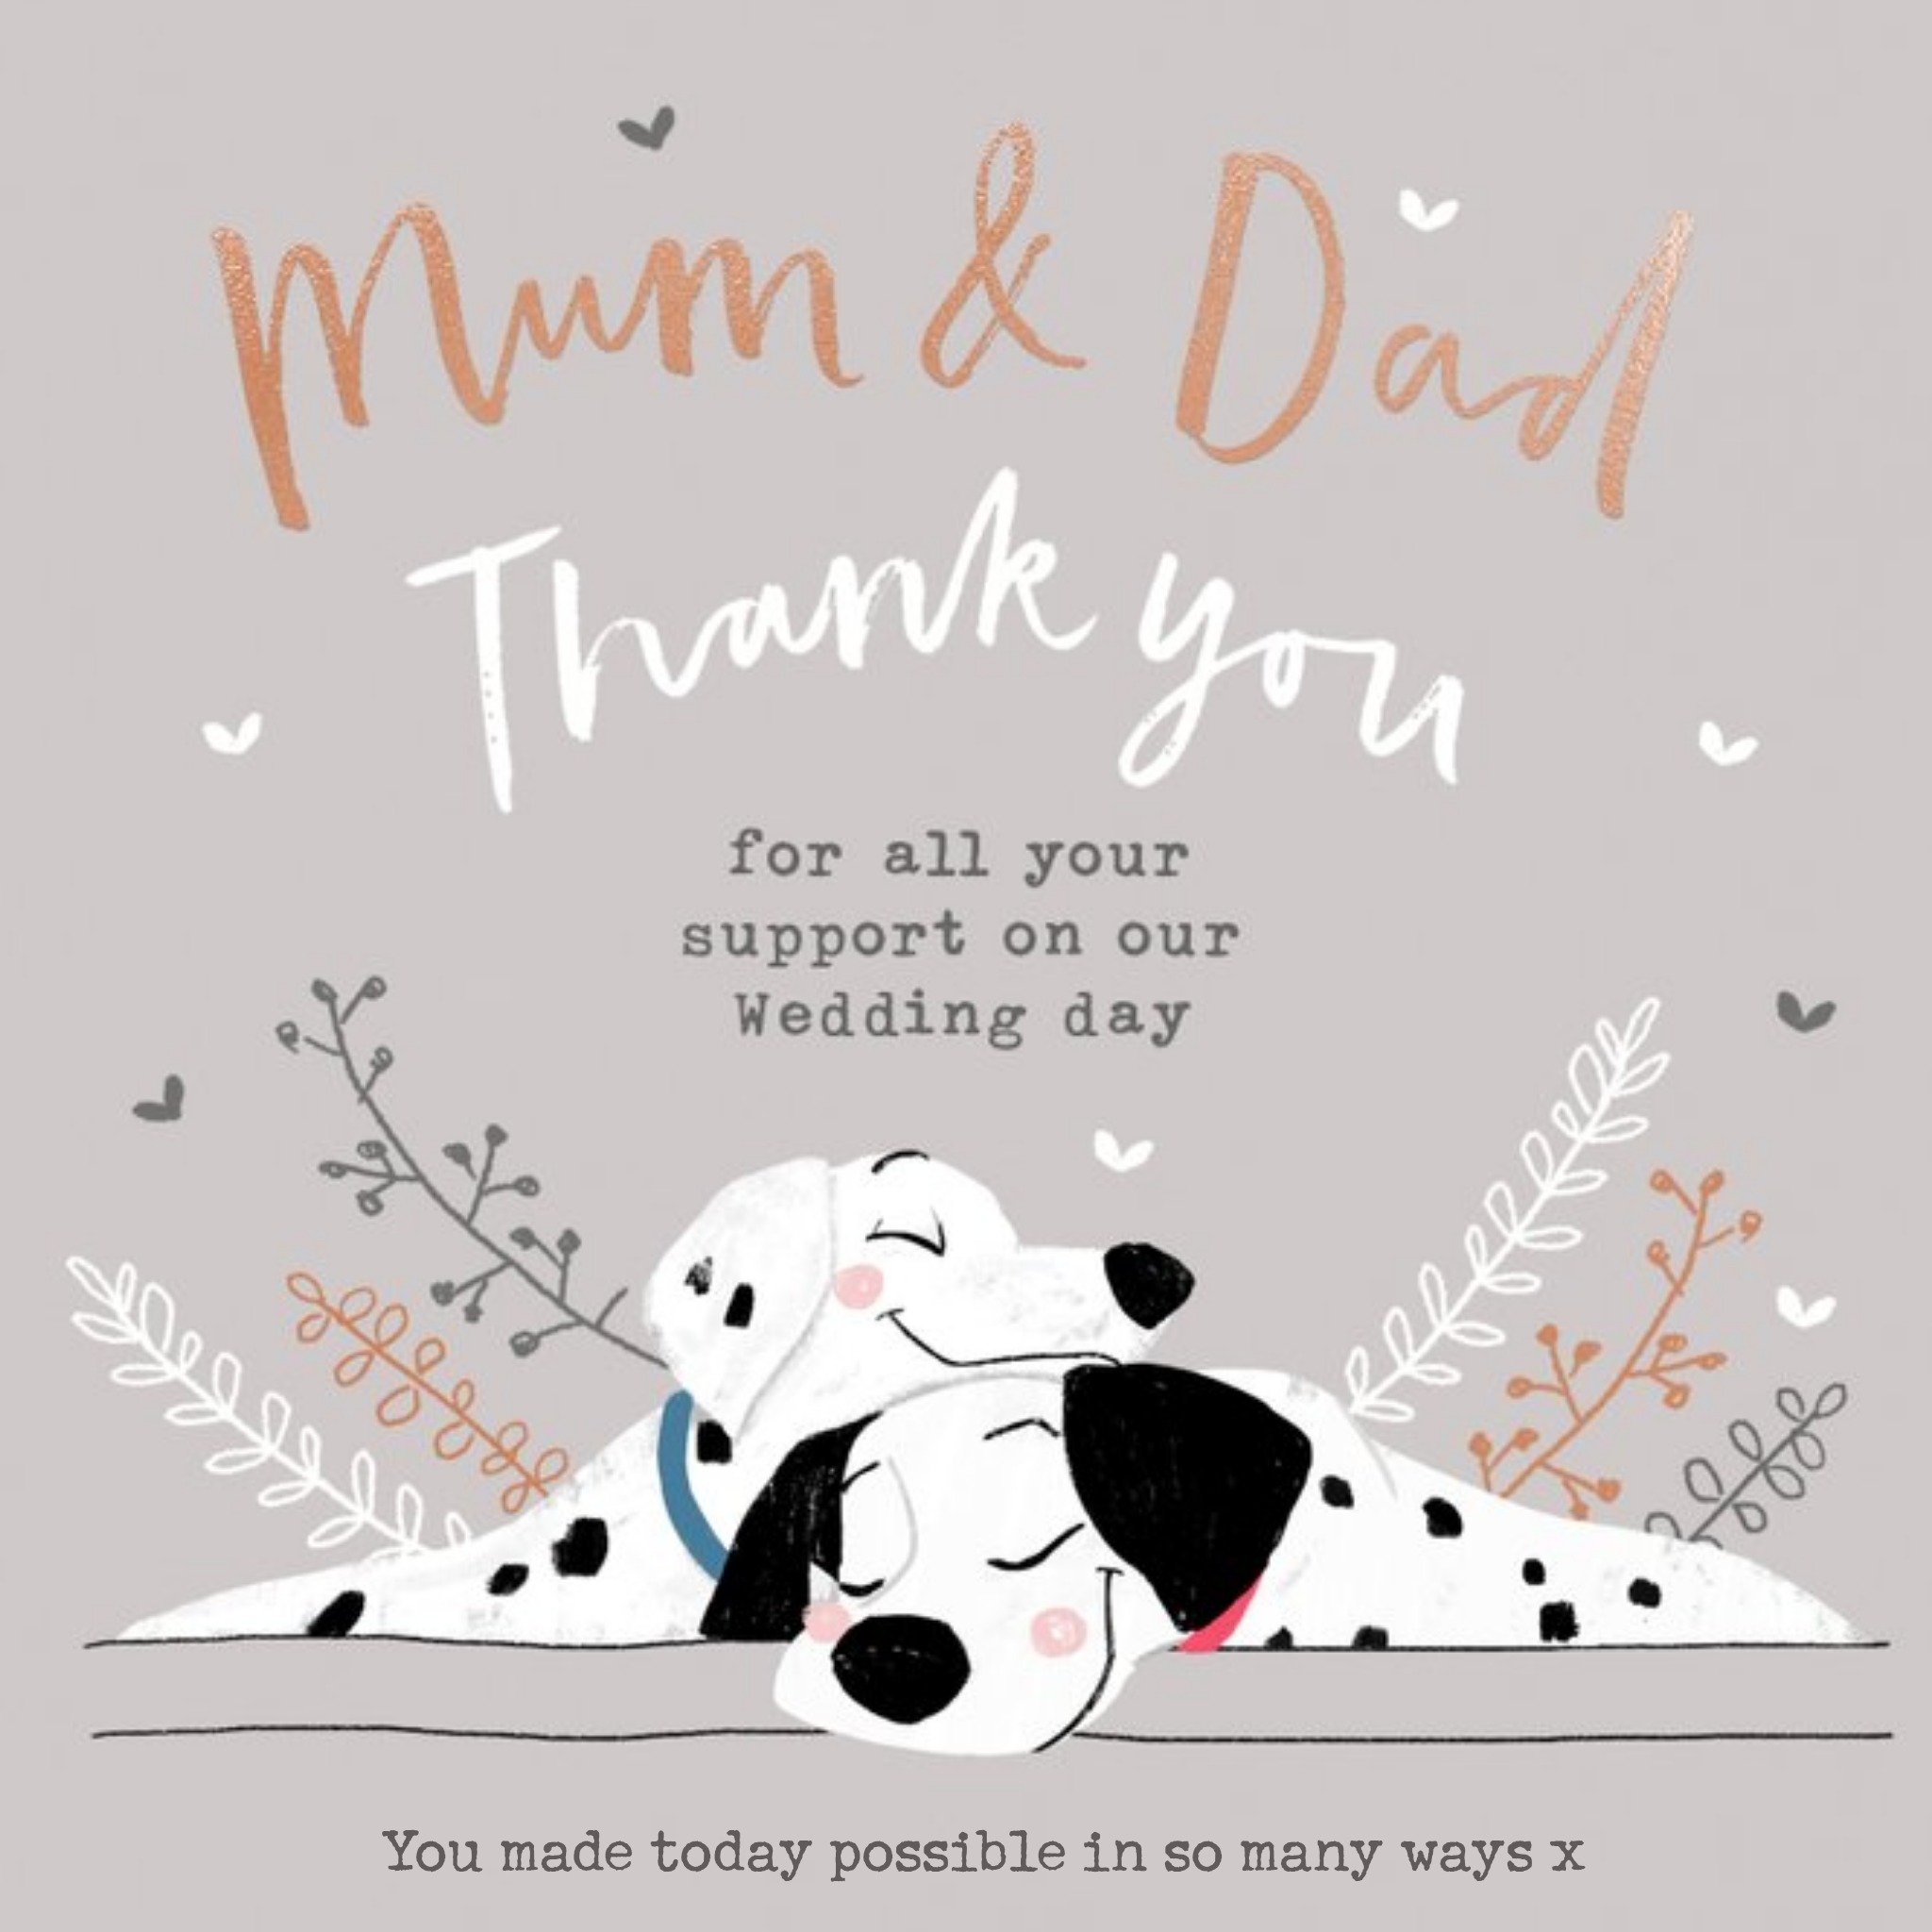 Disney 101 Dalmatians Mum And Dad Thank You For Your Support Wedding Card, Square